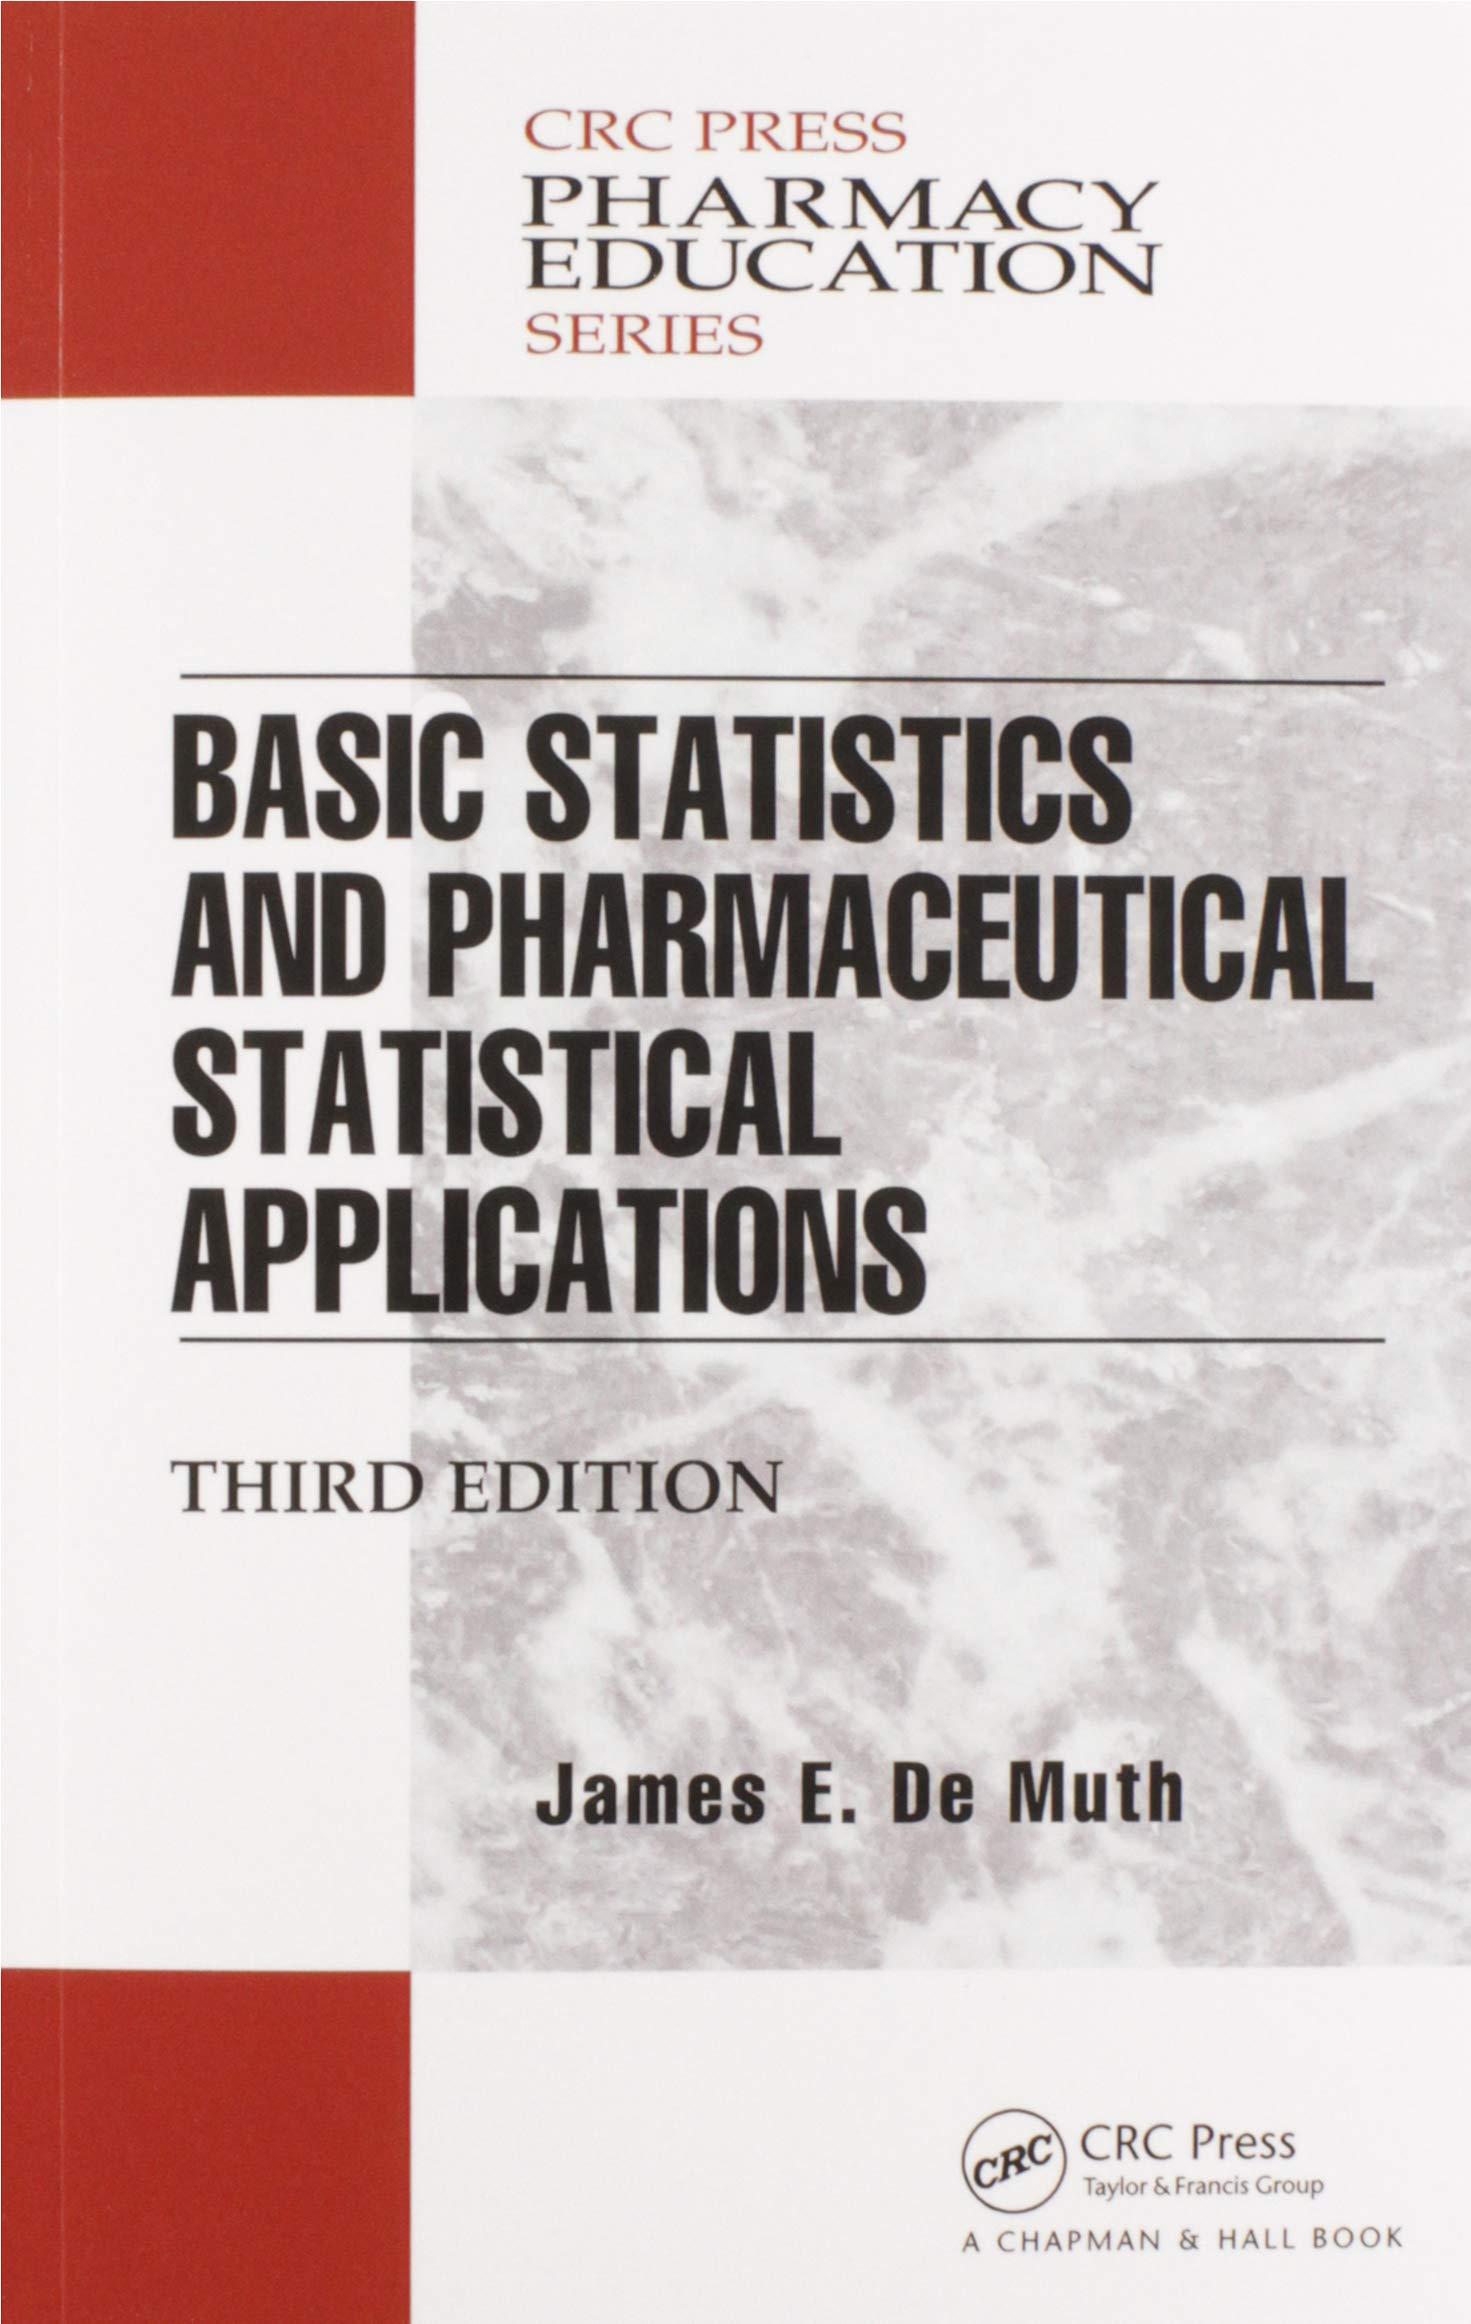 basic statistics and pharmaceutical statistical applications 3rd edition james e. de muth 0367576163,